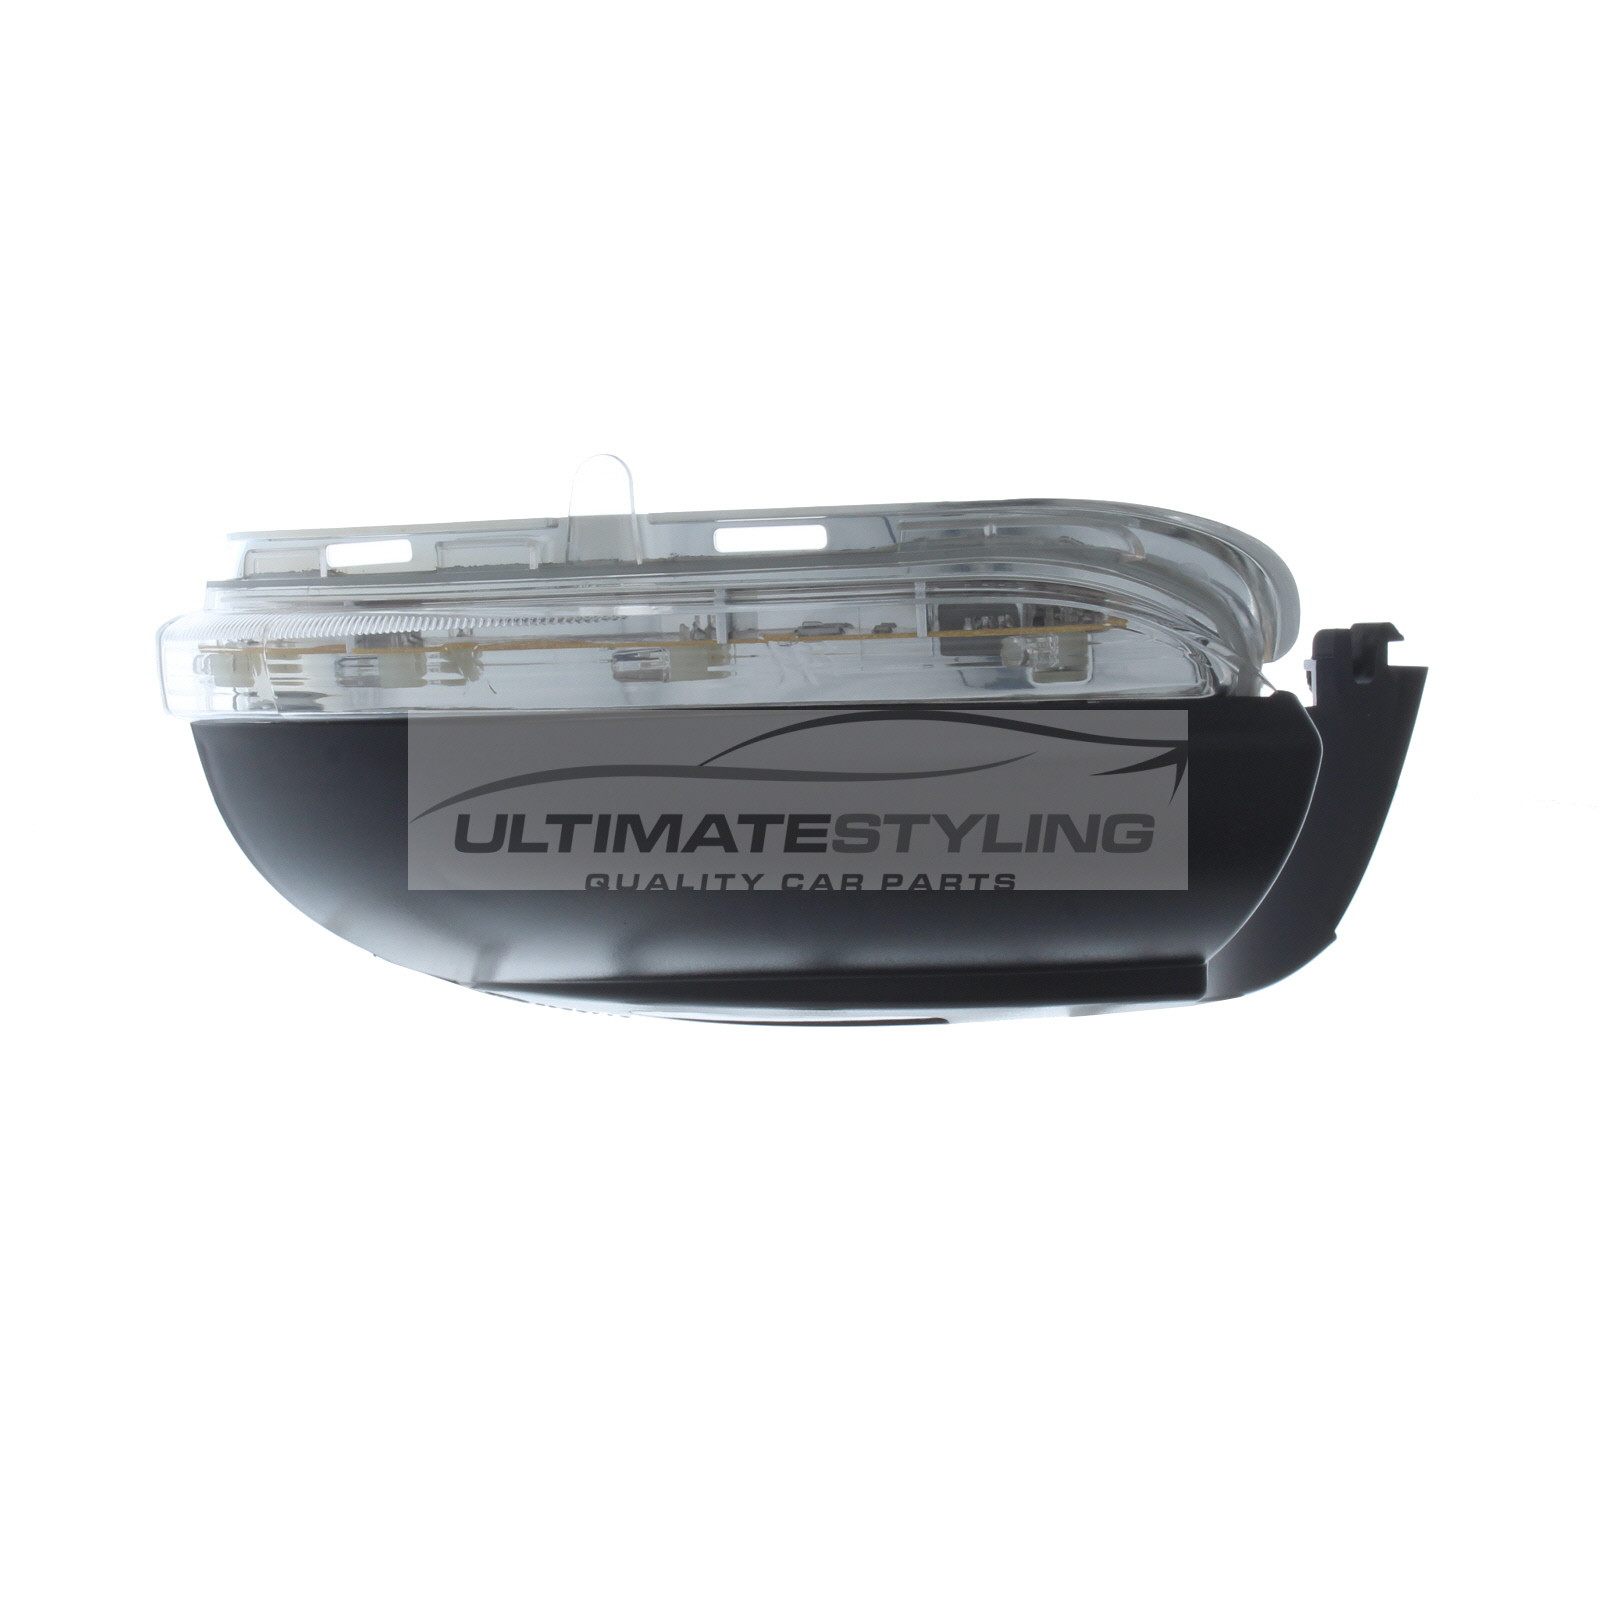 Mirror Indicator for VW Golf